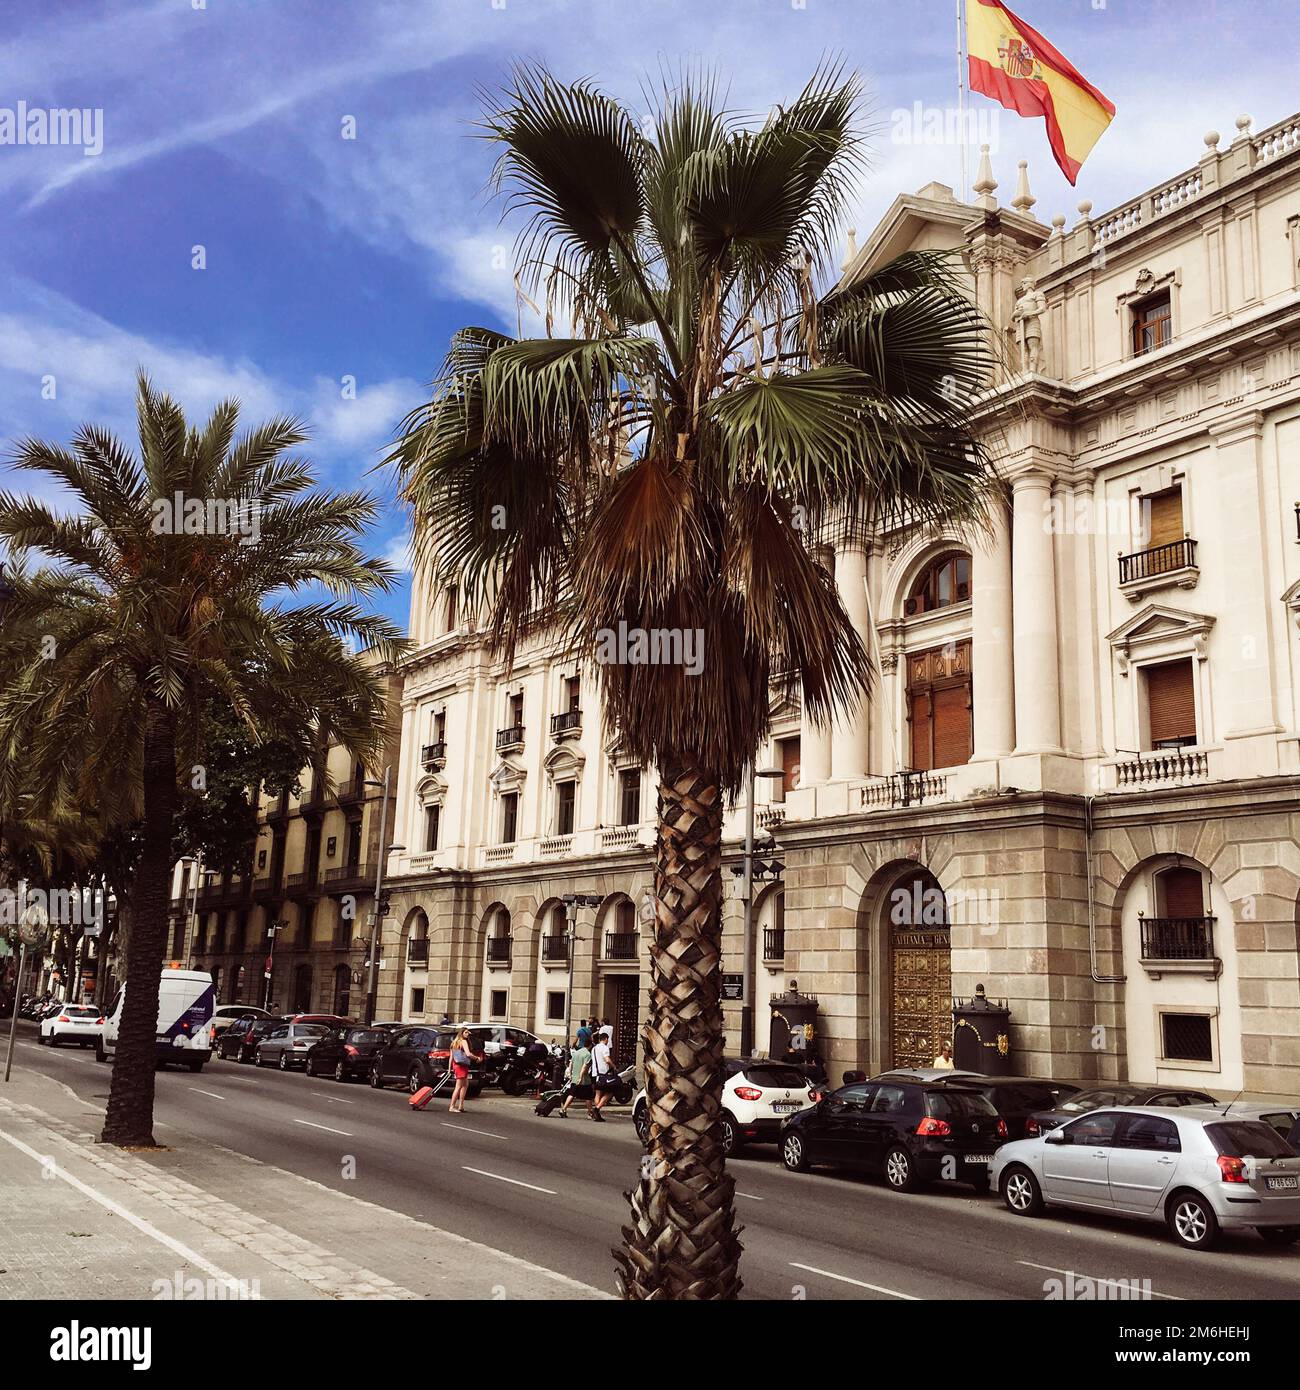 A view of the Palace of the Captaincy General of Barcelona and palm trees dividing the lanes Stock Photo